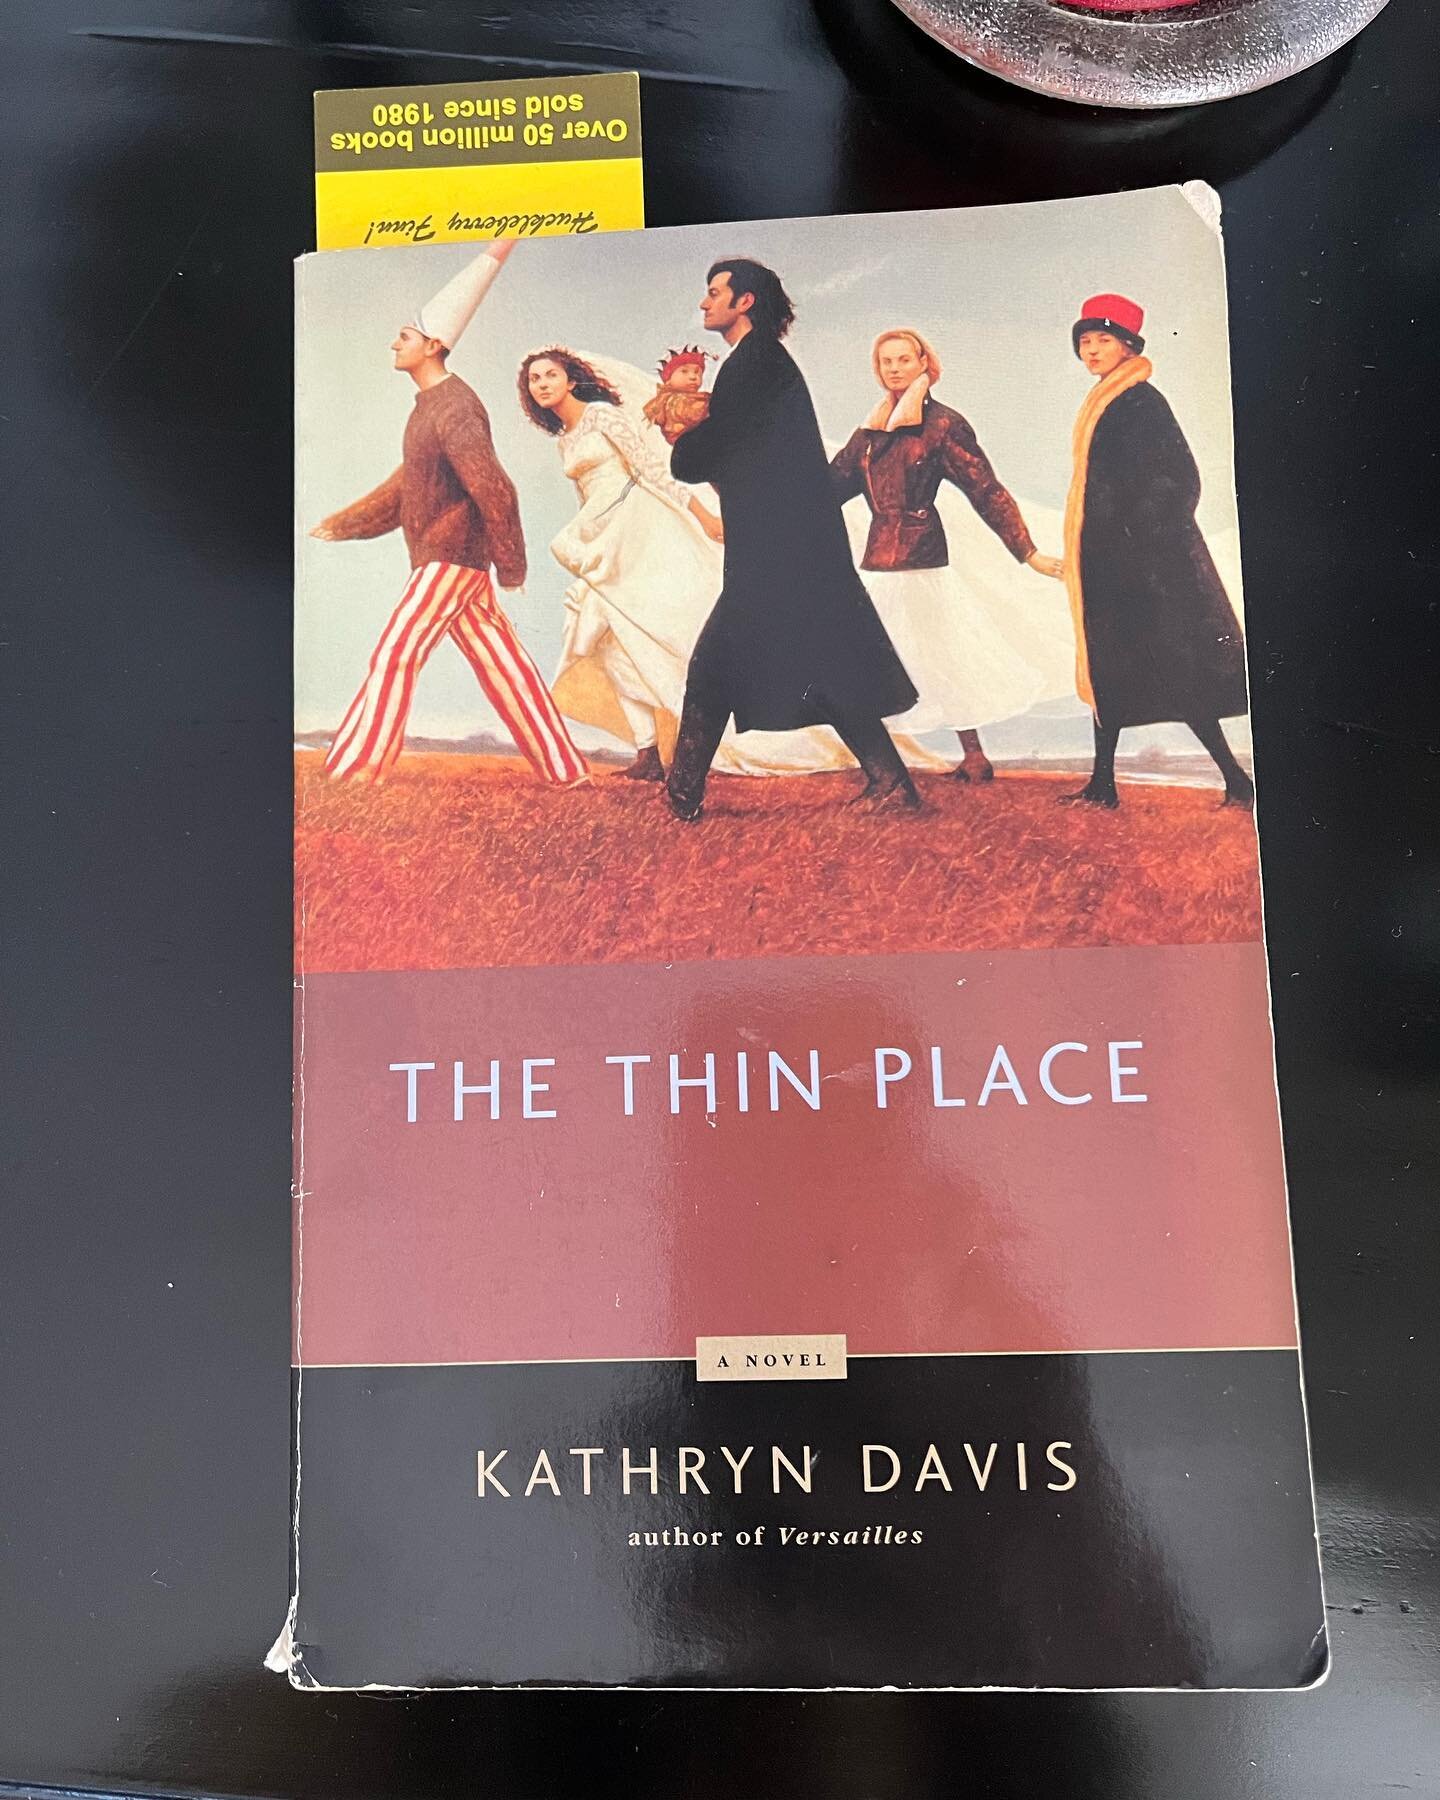 Sunday morning reading. The Thin Place, Kathryn Davis. &ldquo;Davis, God bless her, assumes her readers are intelligent people who are interested in what they&rsquo;re reading.&rdquo; &mdash; Ann Patchett